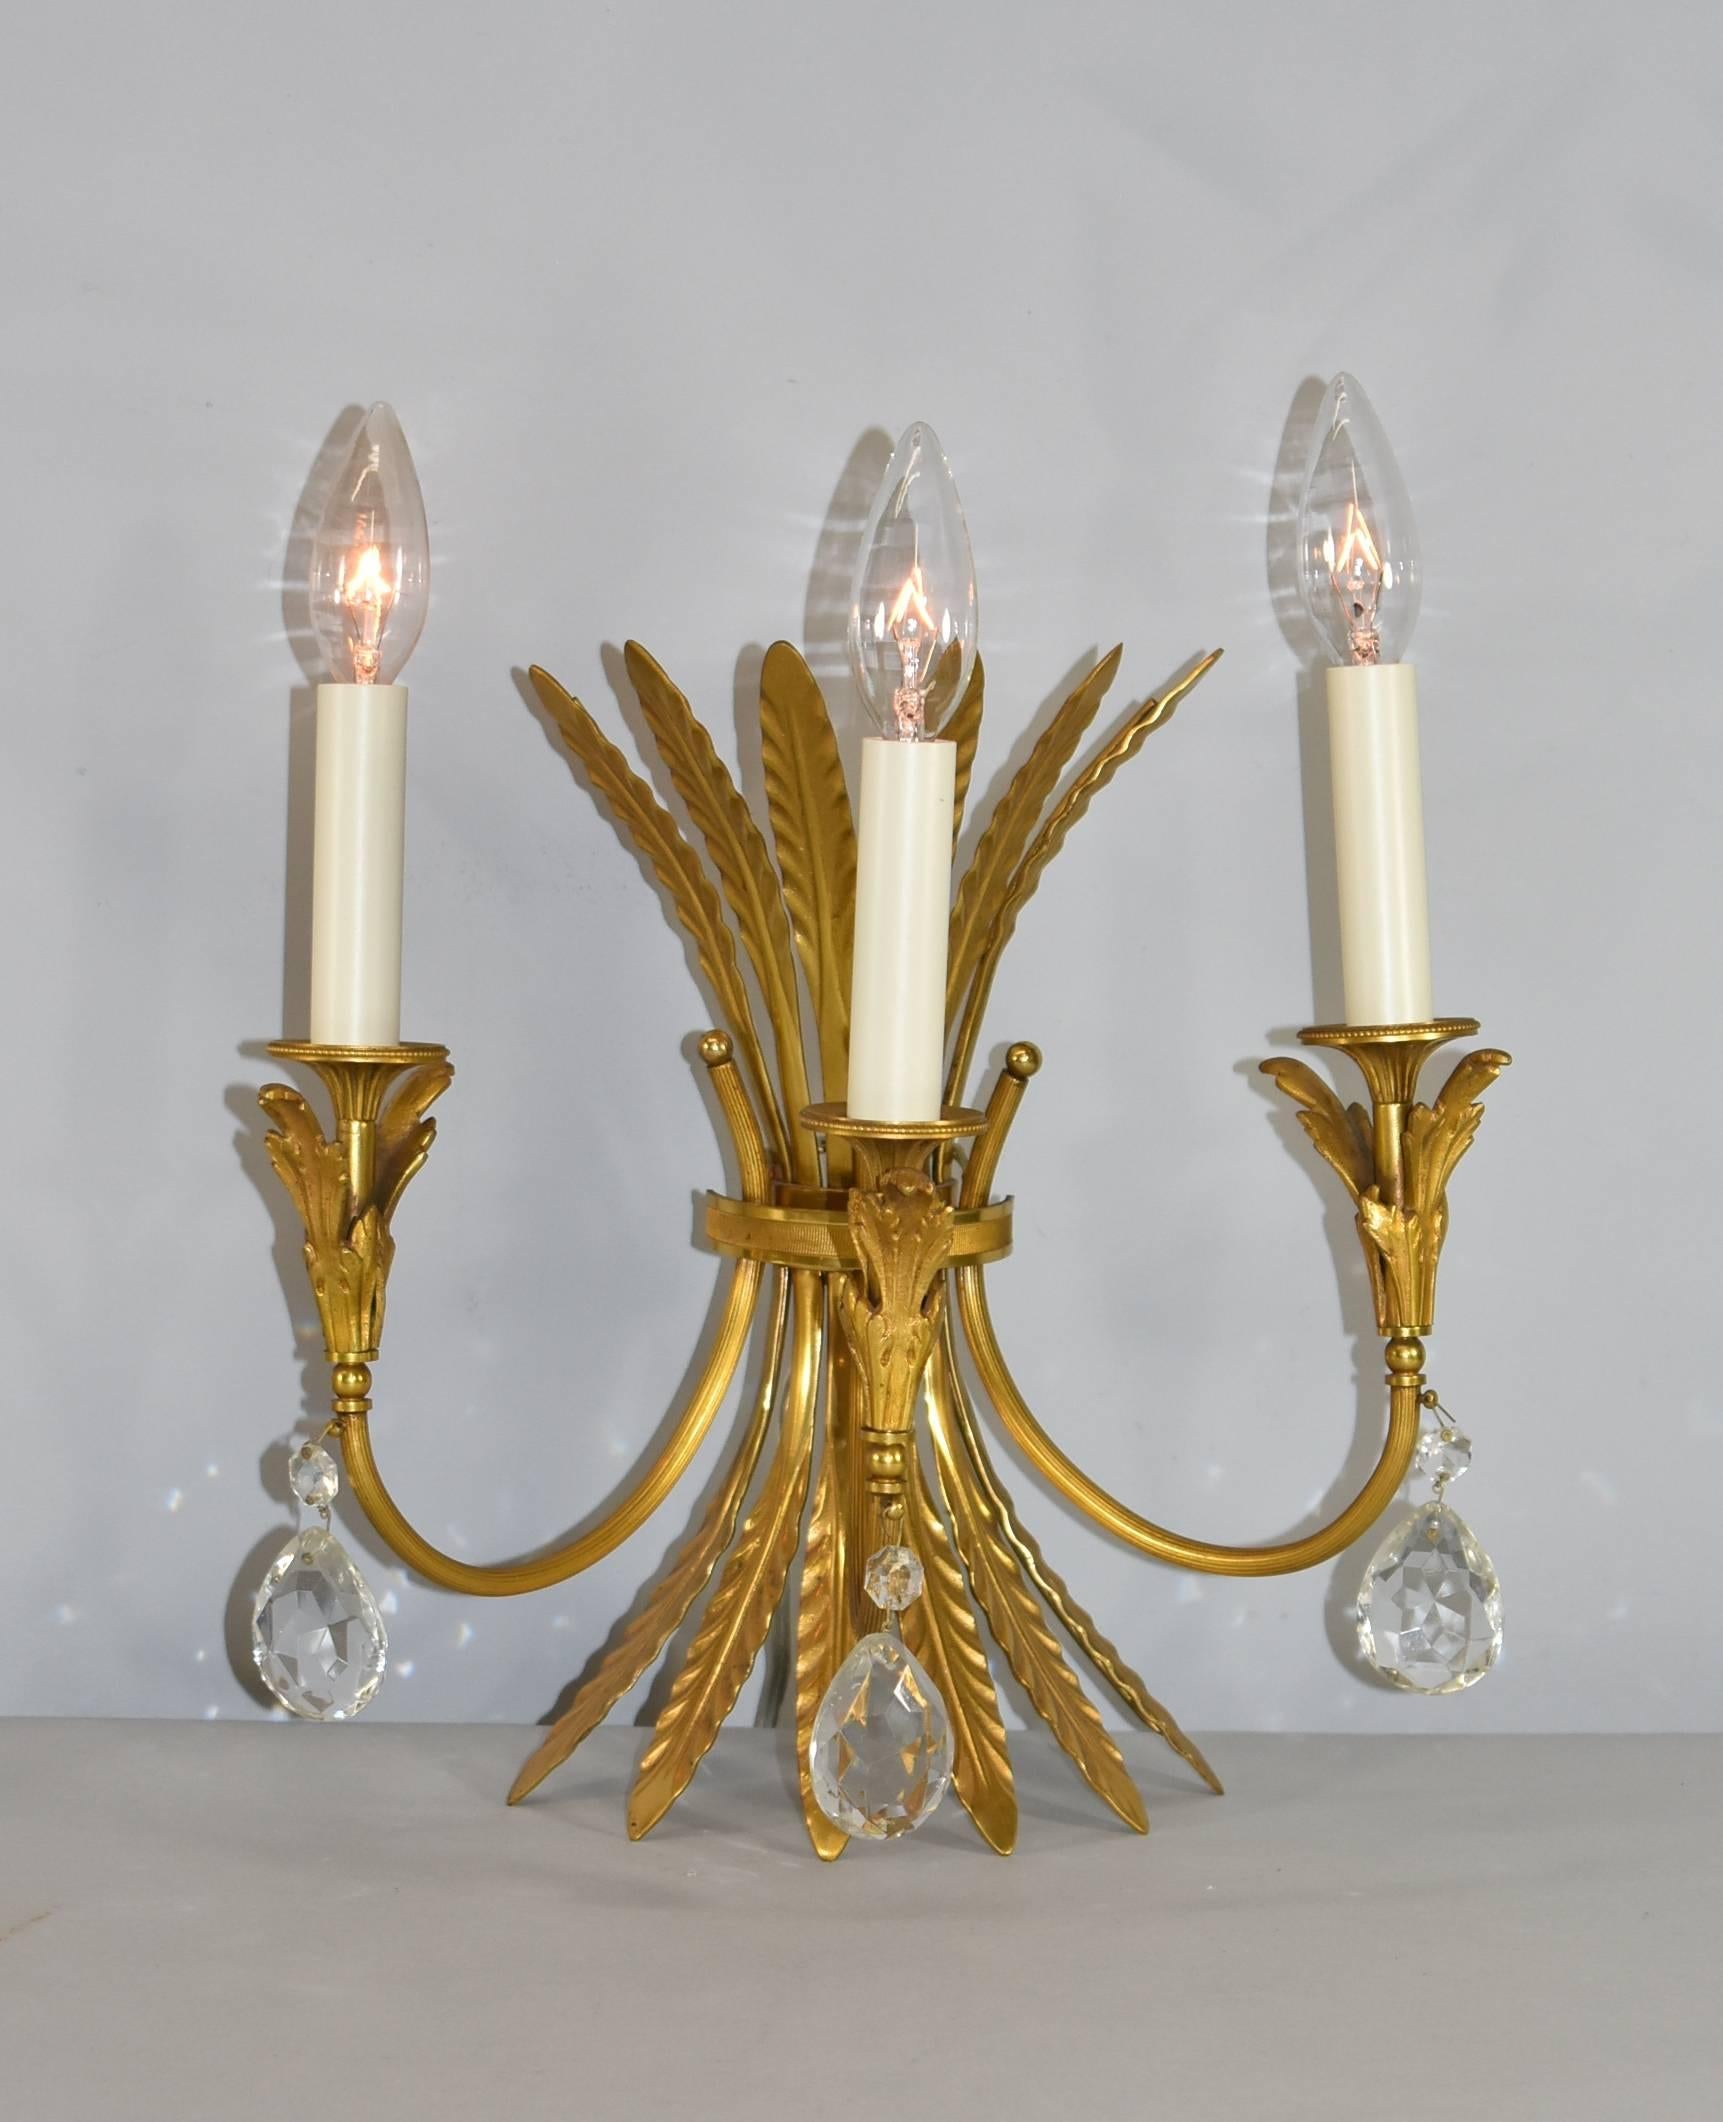 A beautiful pair of Italian neoclassic style three-arm brass wall sconces with cut crystal teardrop accenting. These sconces feature a sheaf body with leaf accents below the brass bobeches holding the cream candlesticks. You can add shades for a